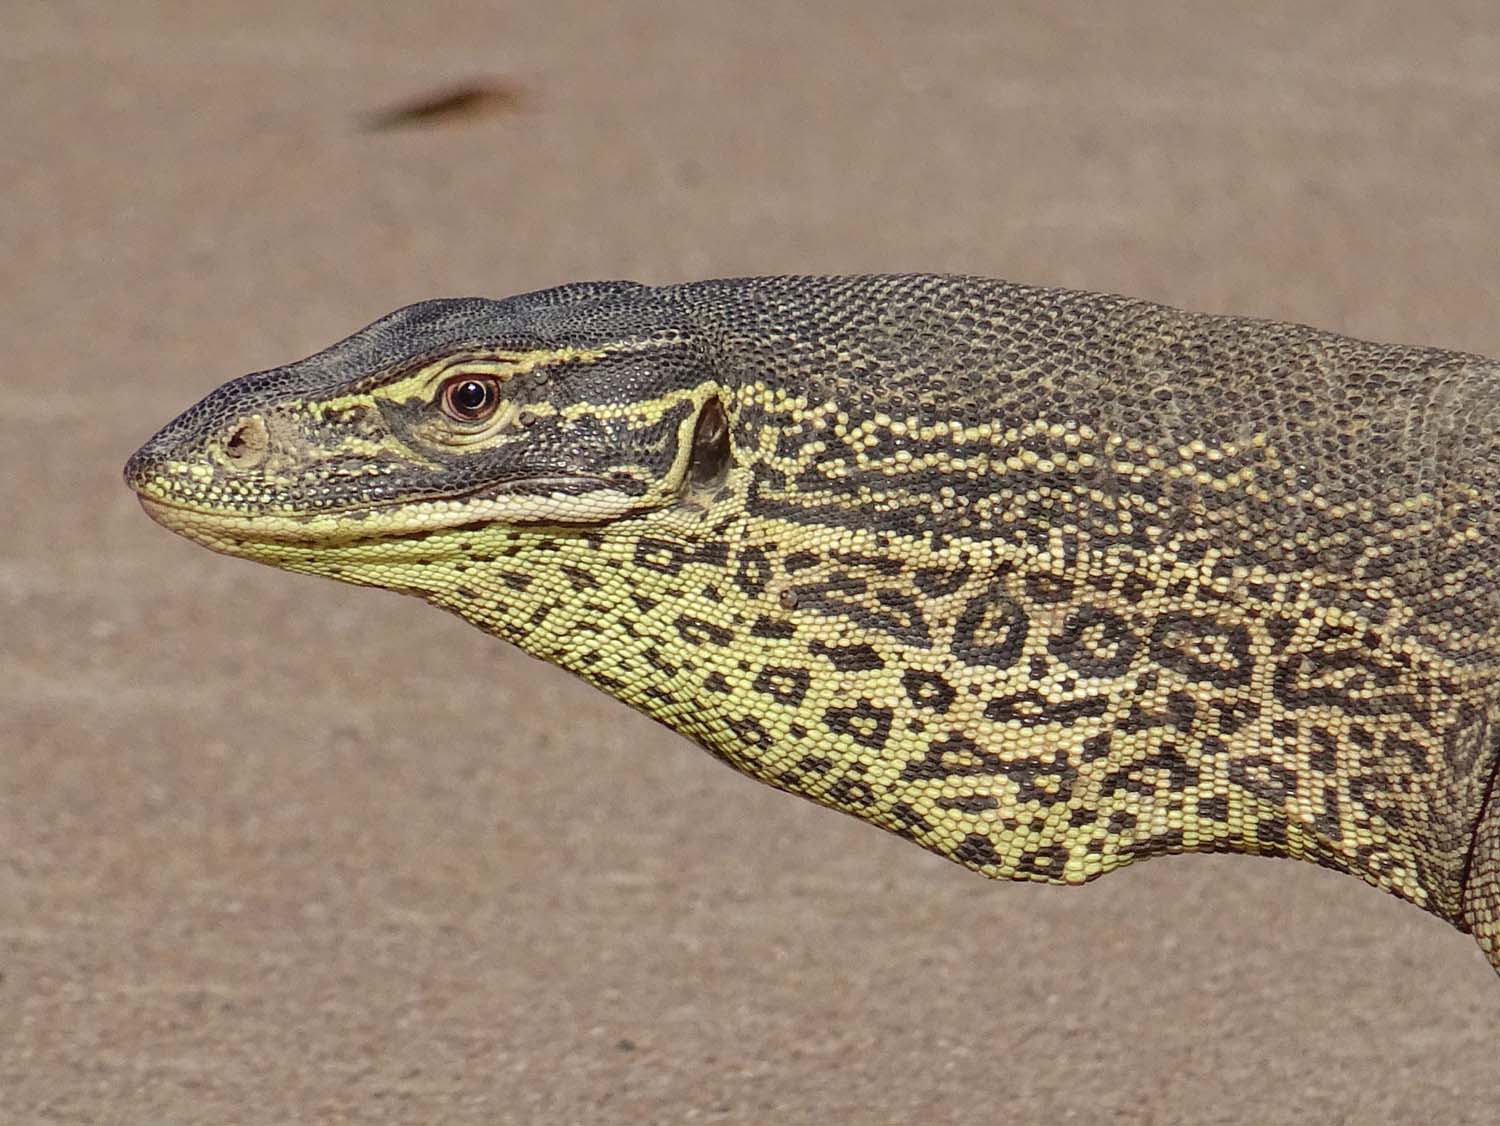 we bump into this local on our drive in Lakefield NP - a beautiful yellow-spotted goanna